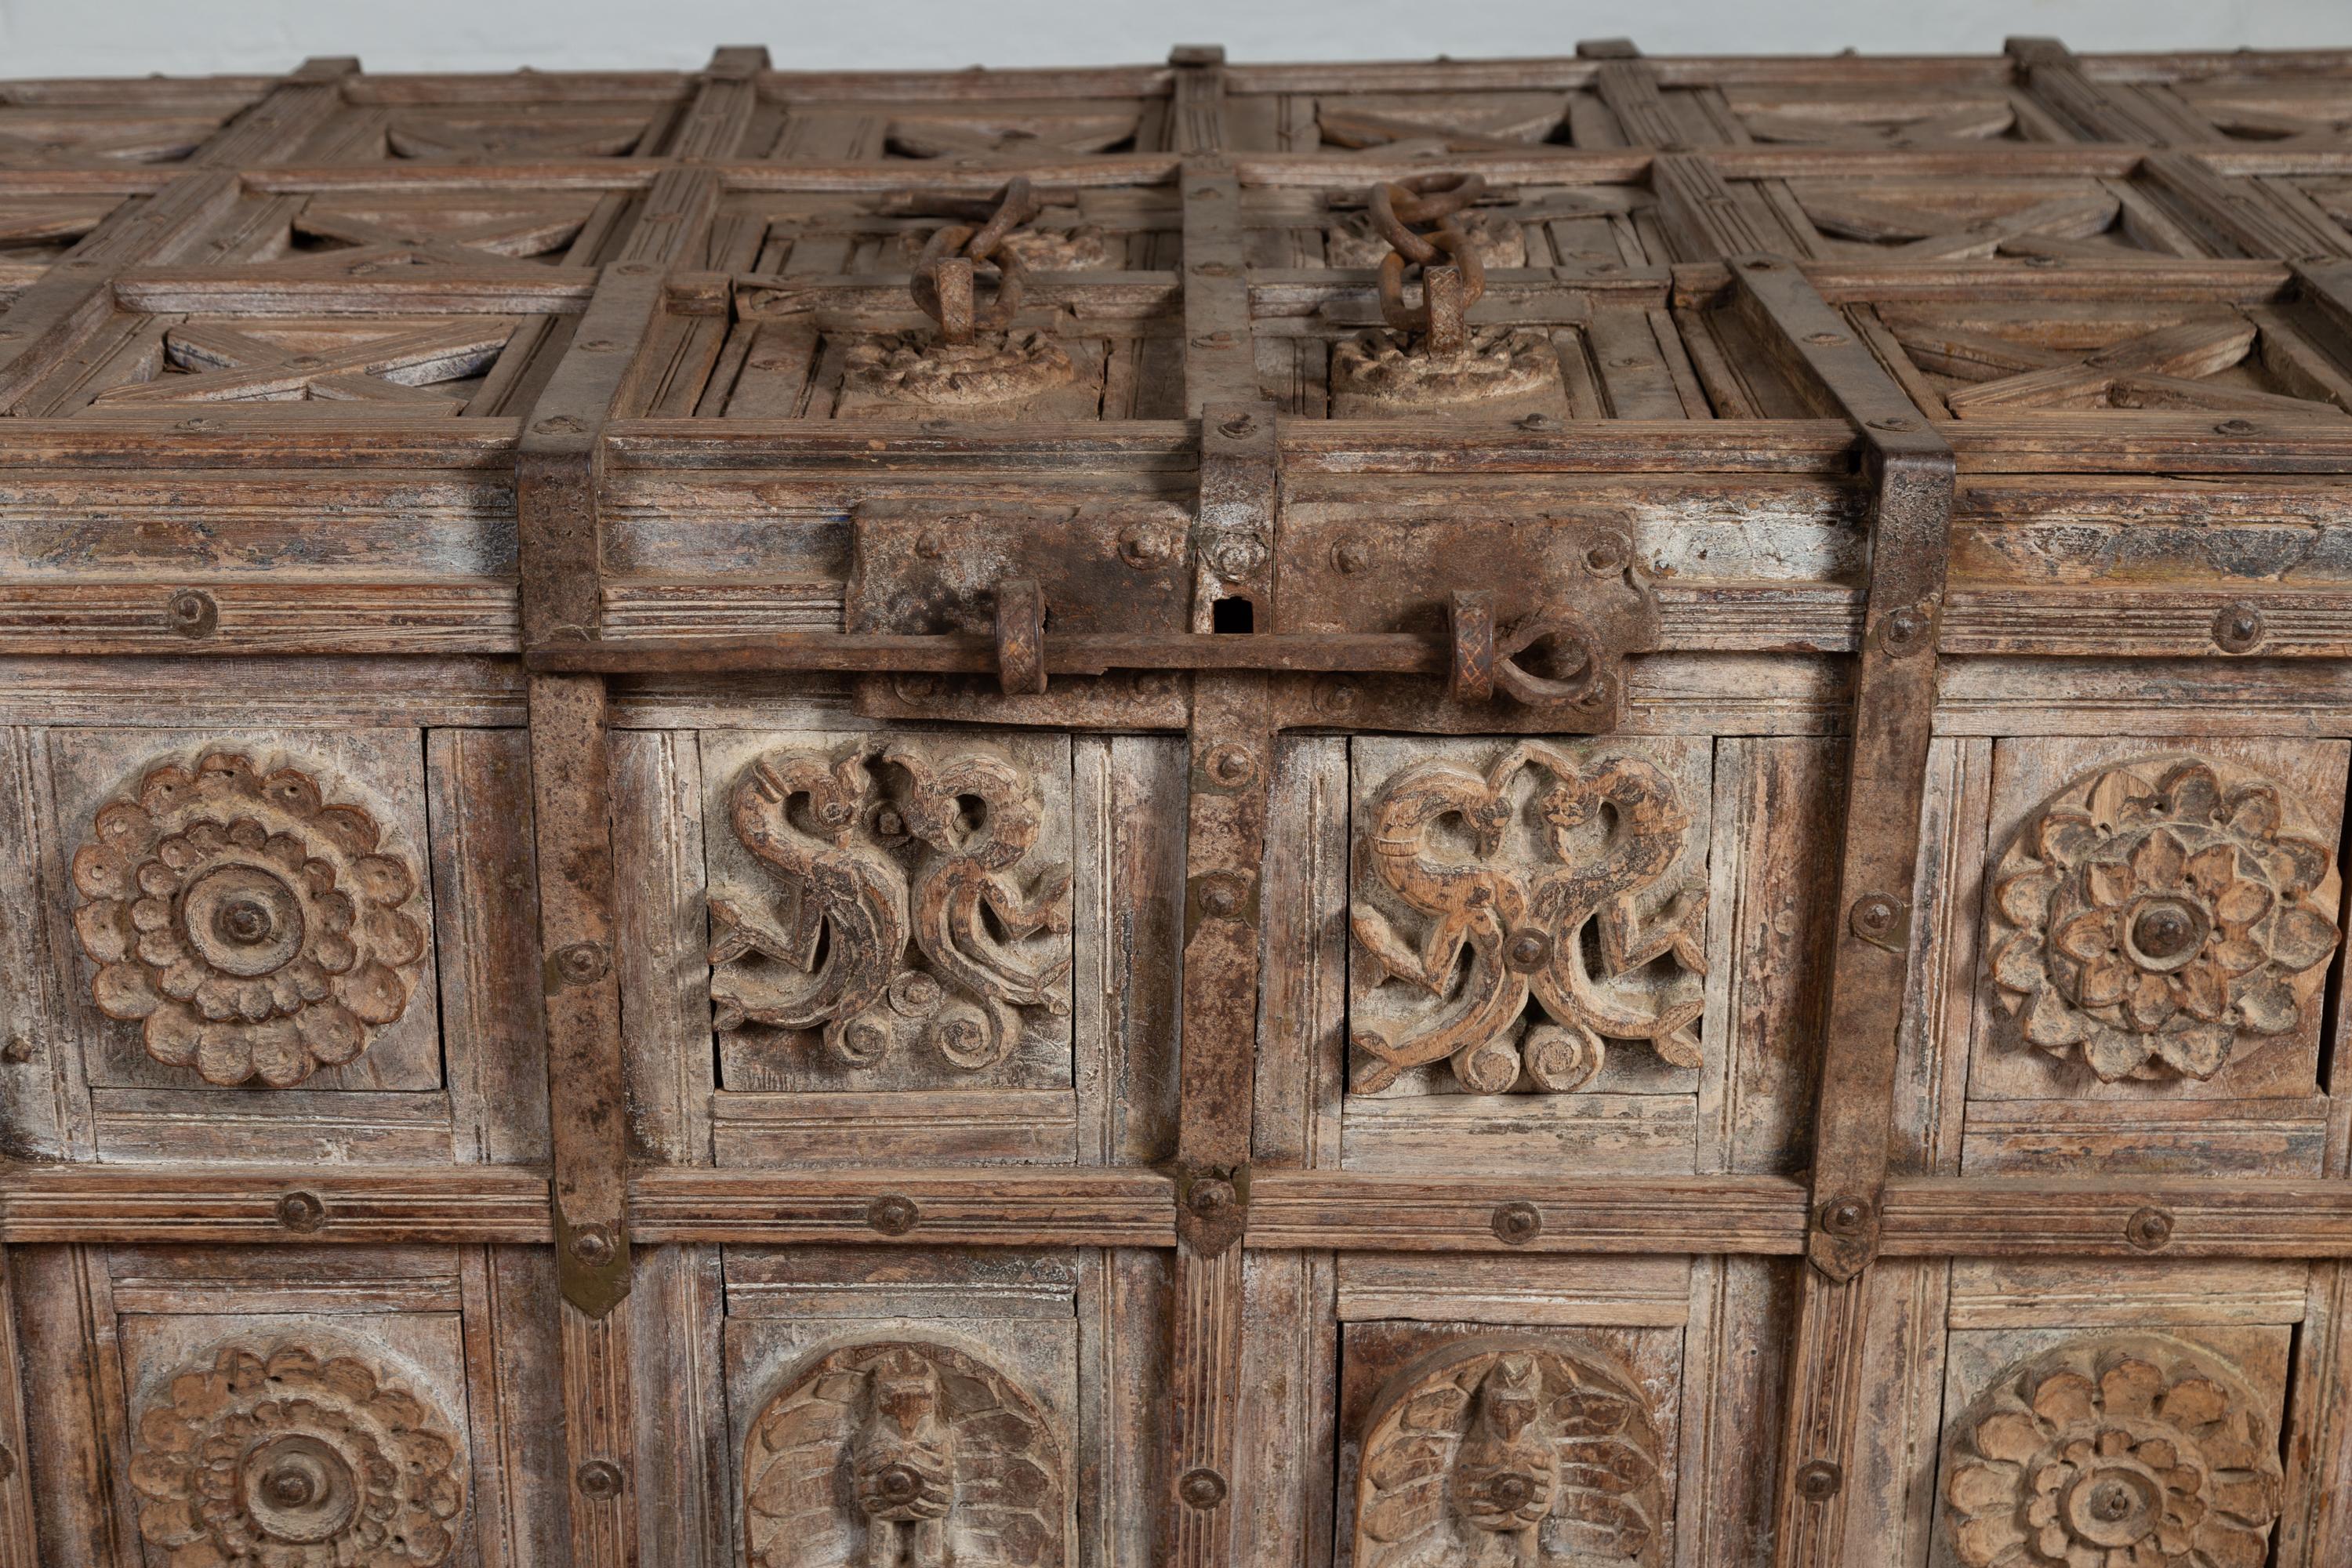 19th Century Oversized Indian Treasure Chest with Raised X Patterns, Rosettes and Animals